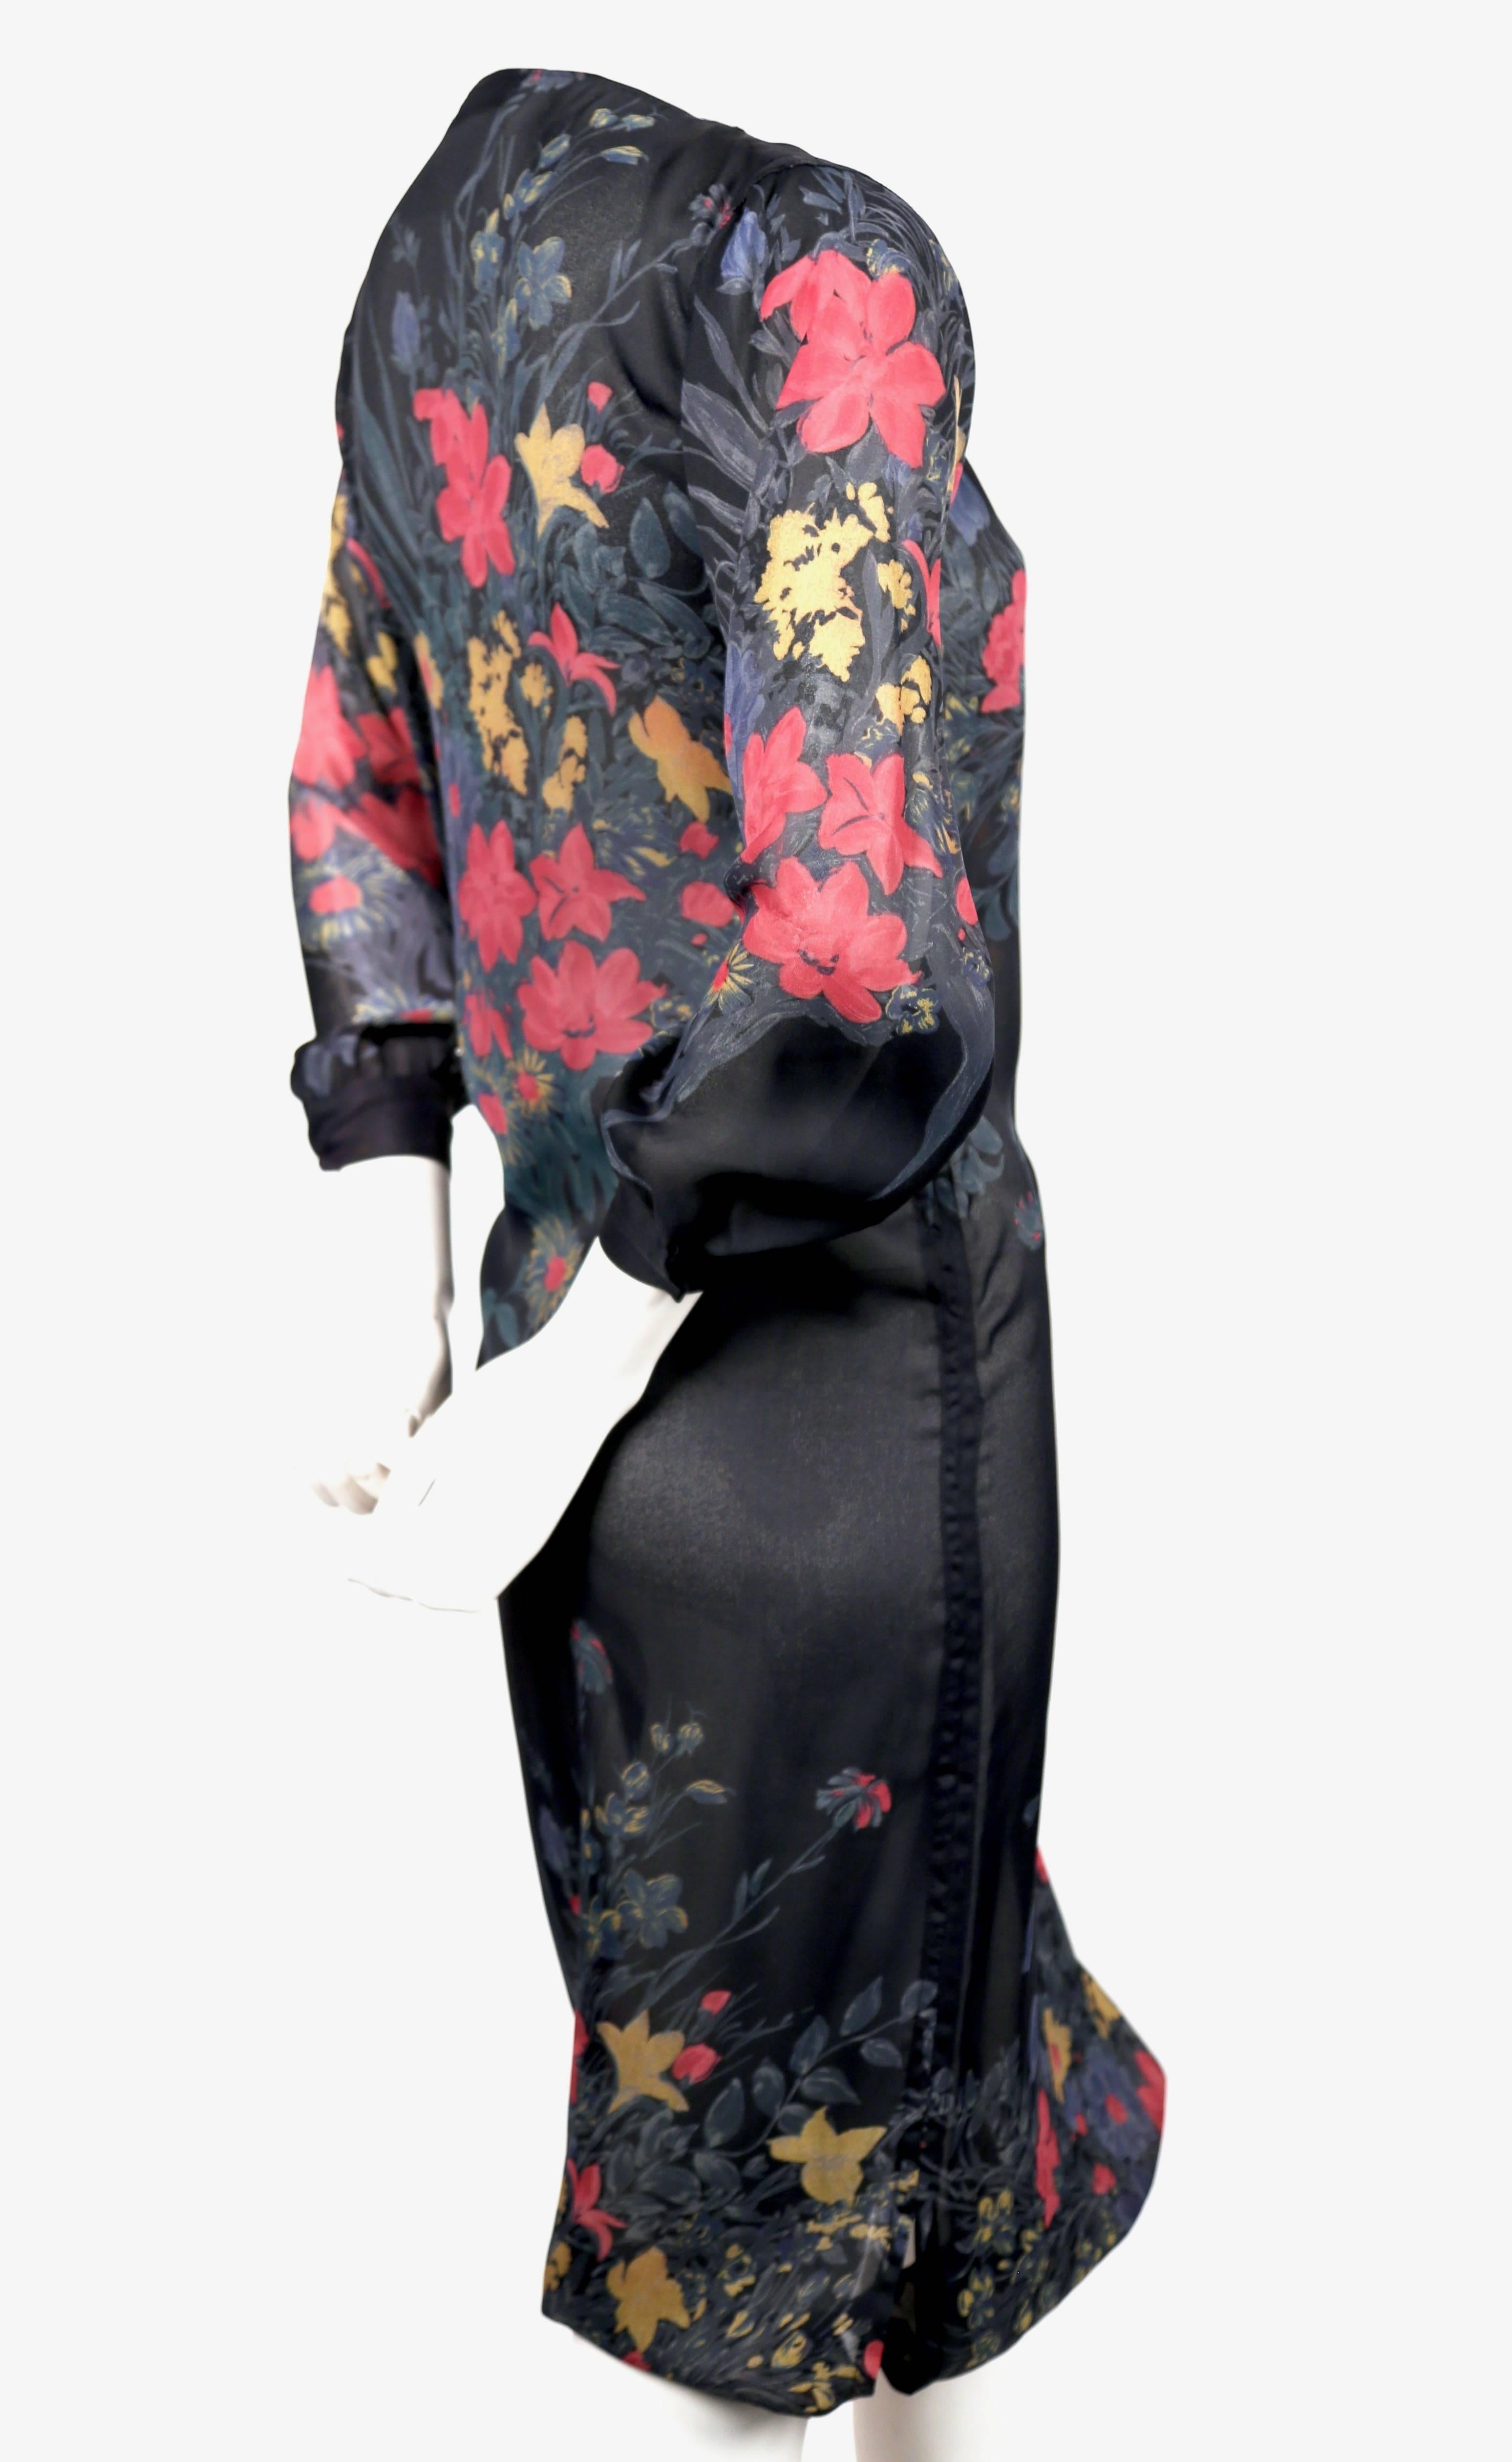 Semi-sheer, silk, floral printed dress with asymmetrically placed button collar and drawstring hemline deigned by Sonia Rykiel dating to the late 1970's. Fits a US 2 (34